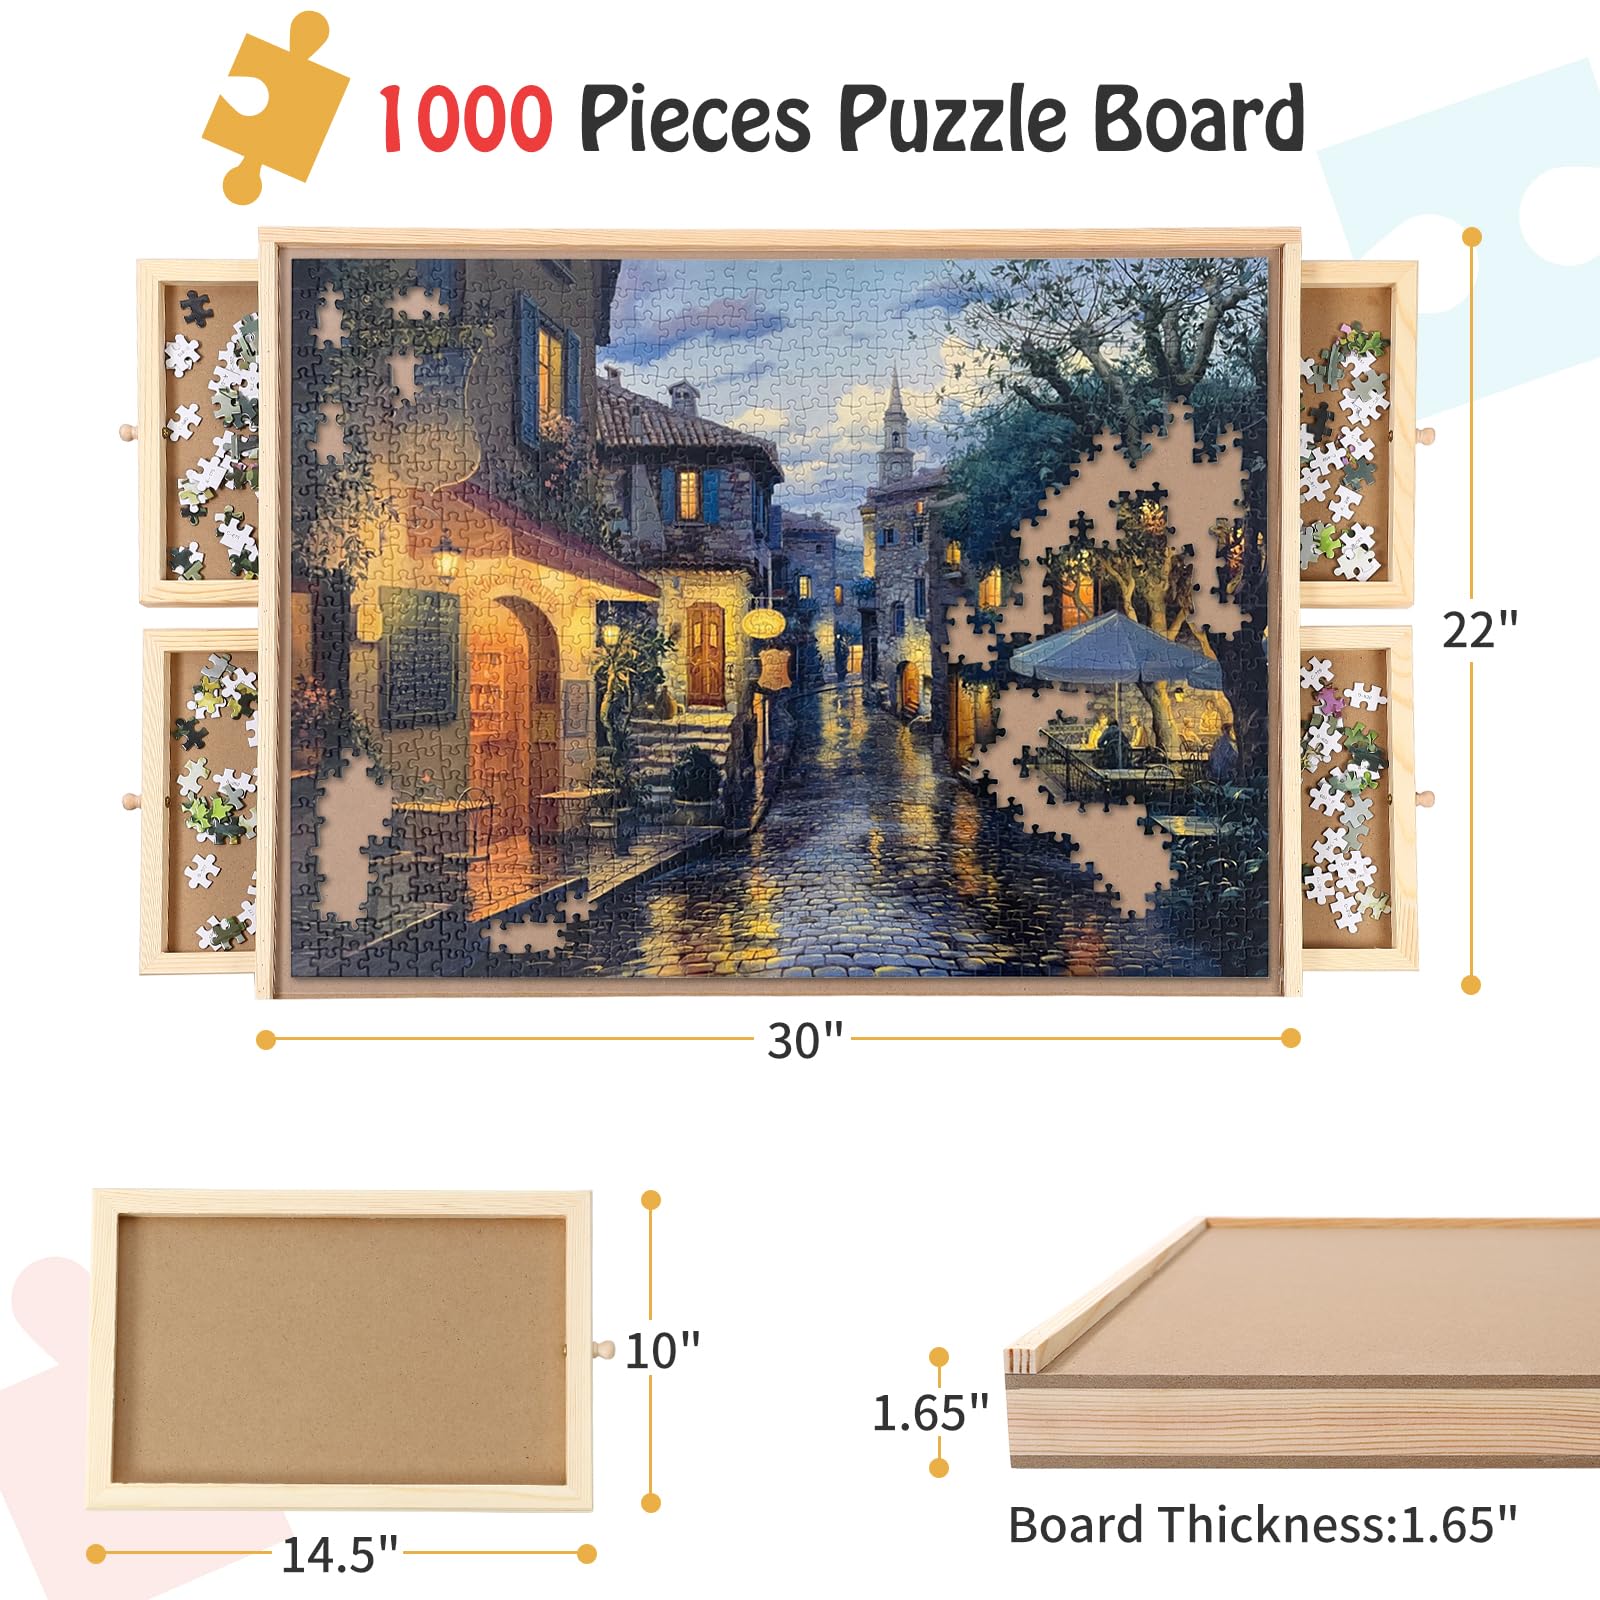 Wooden Rotating Puzzle Board with 4 Magnetic Sorting Drawers & Protective Cover,1000 Pieces Jigsaw Puzzle Table for Adults and Kids,22